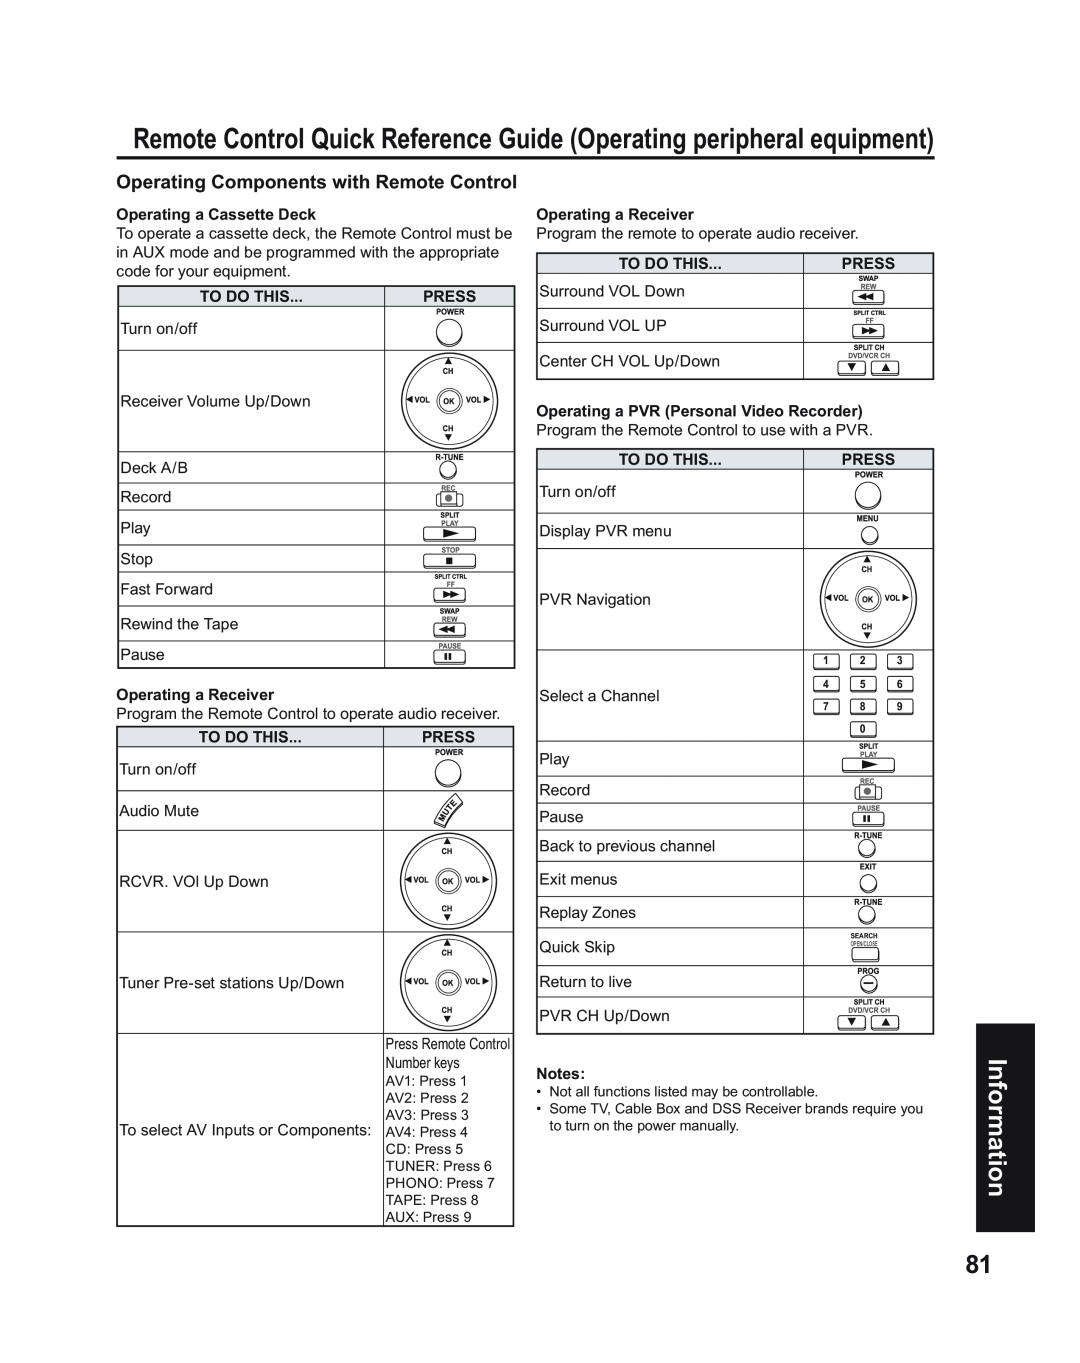 Panasonic PT-43LC14 Remote Control Quick Reference Guide Operating peripheral equipment, Information, To Do This, Press 